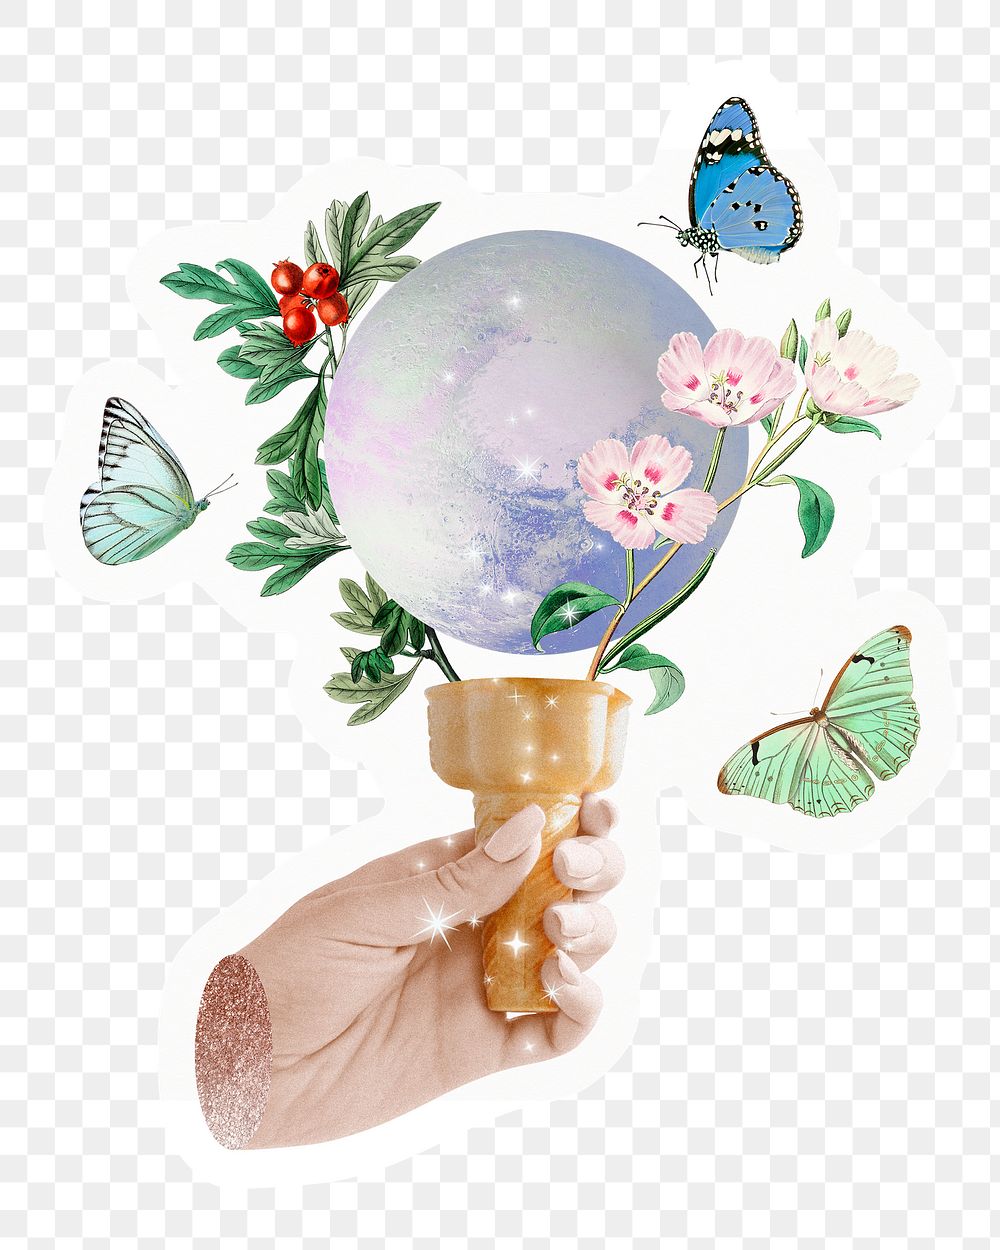 Aesthetic environment png sticker, transparent background